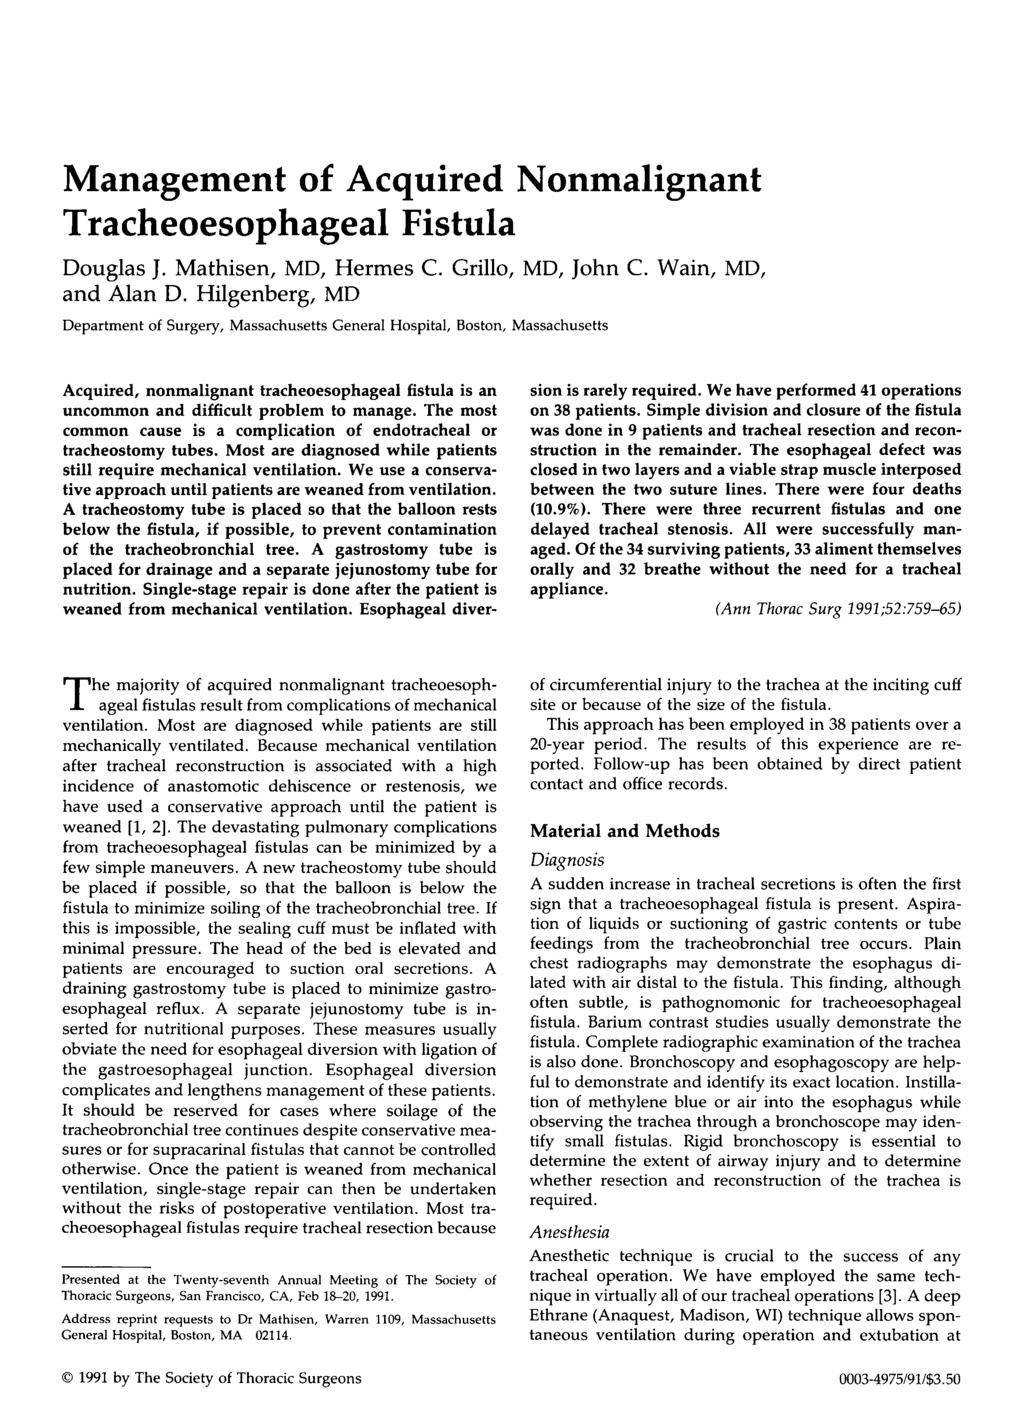 Management of Acquired Nonmalignant Tracheoesophageal Fistula Douglas J. Mathisen, MD, Hermes C. Grillo, MD, John C. Wain, MD, and Alan D.